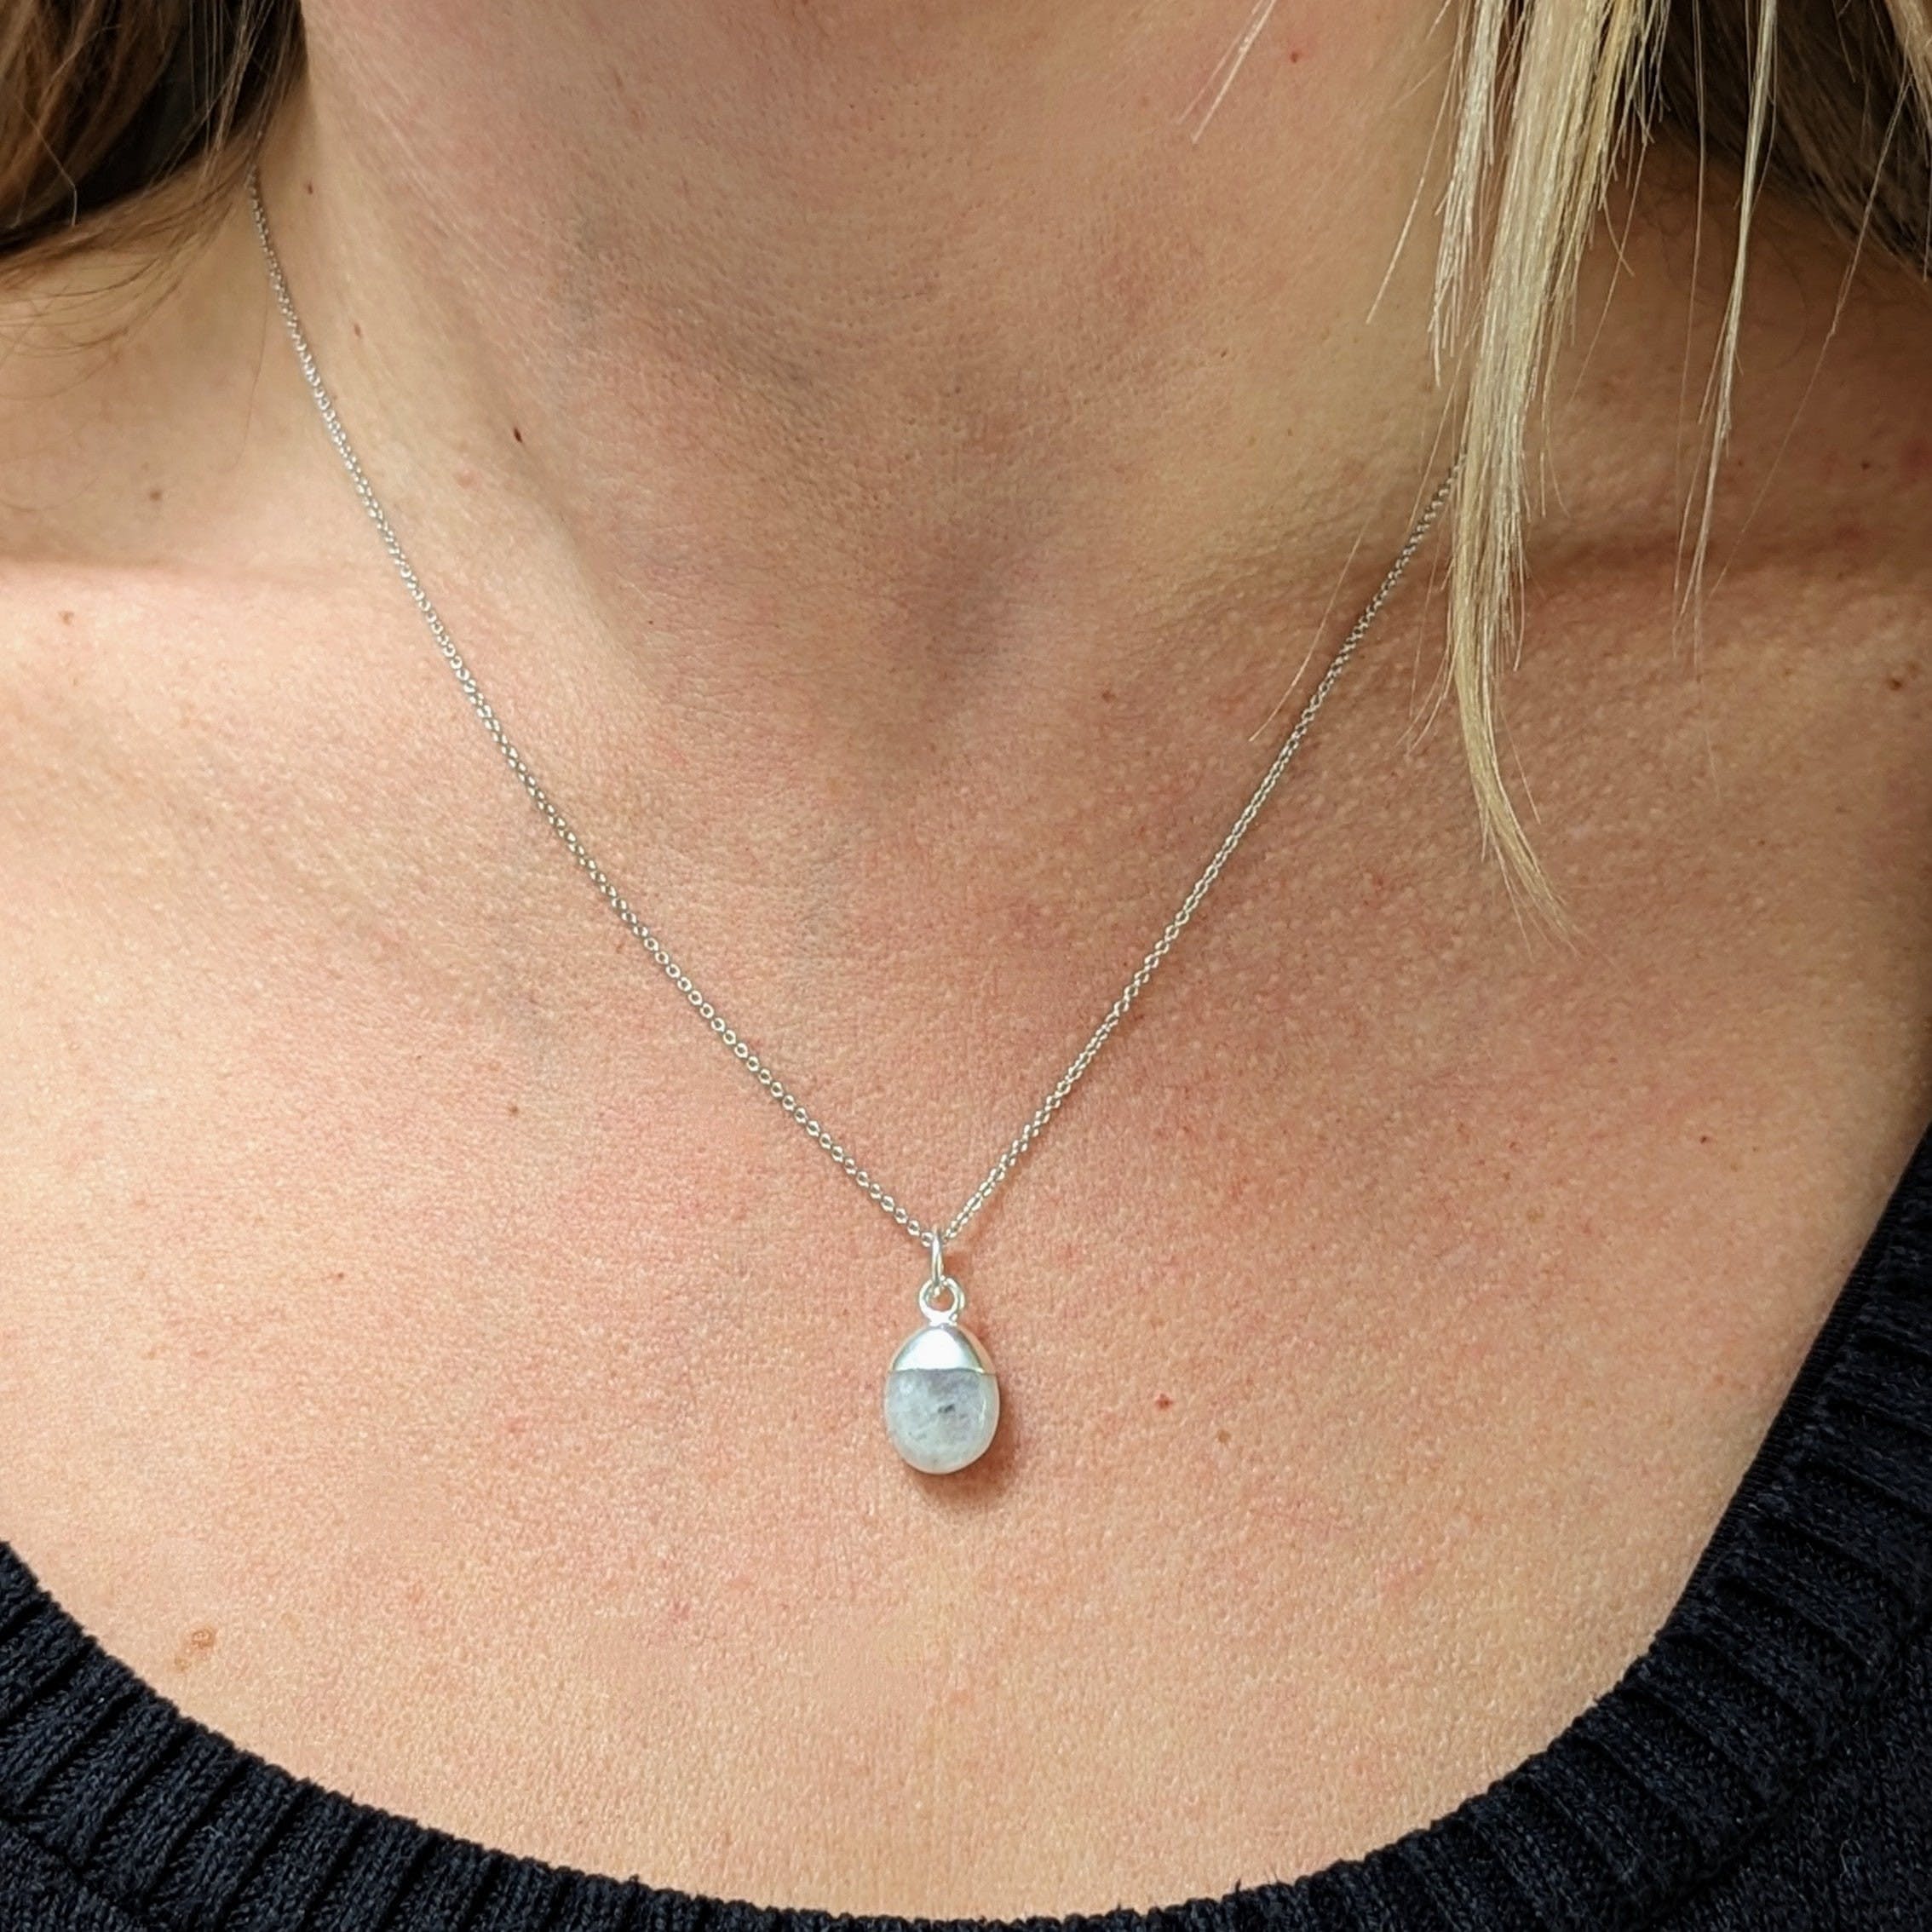 Smooth Tumbled Moonstone Pendant Necklace